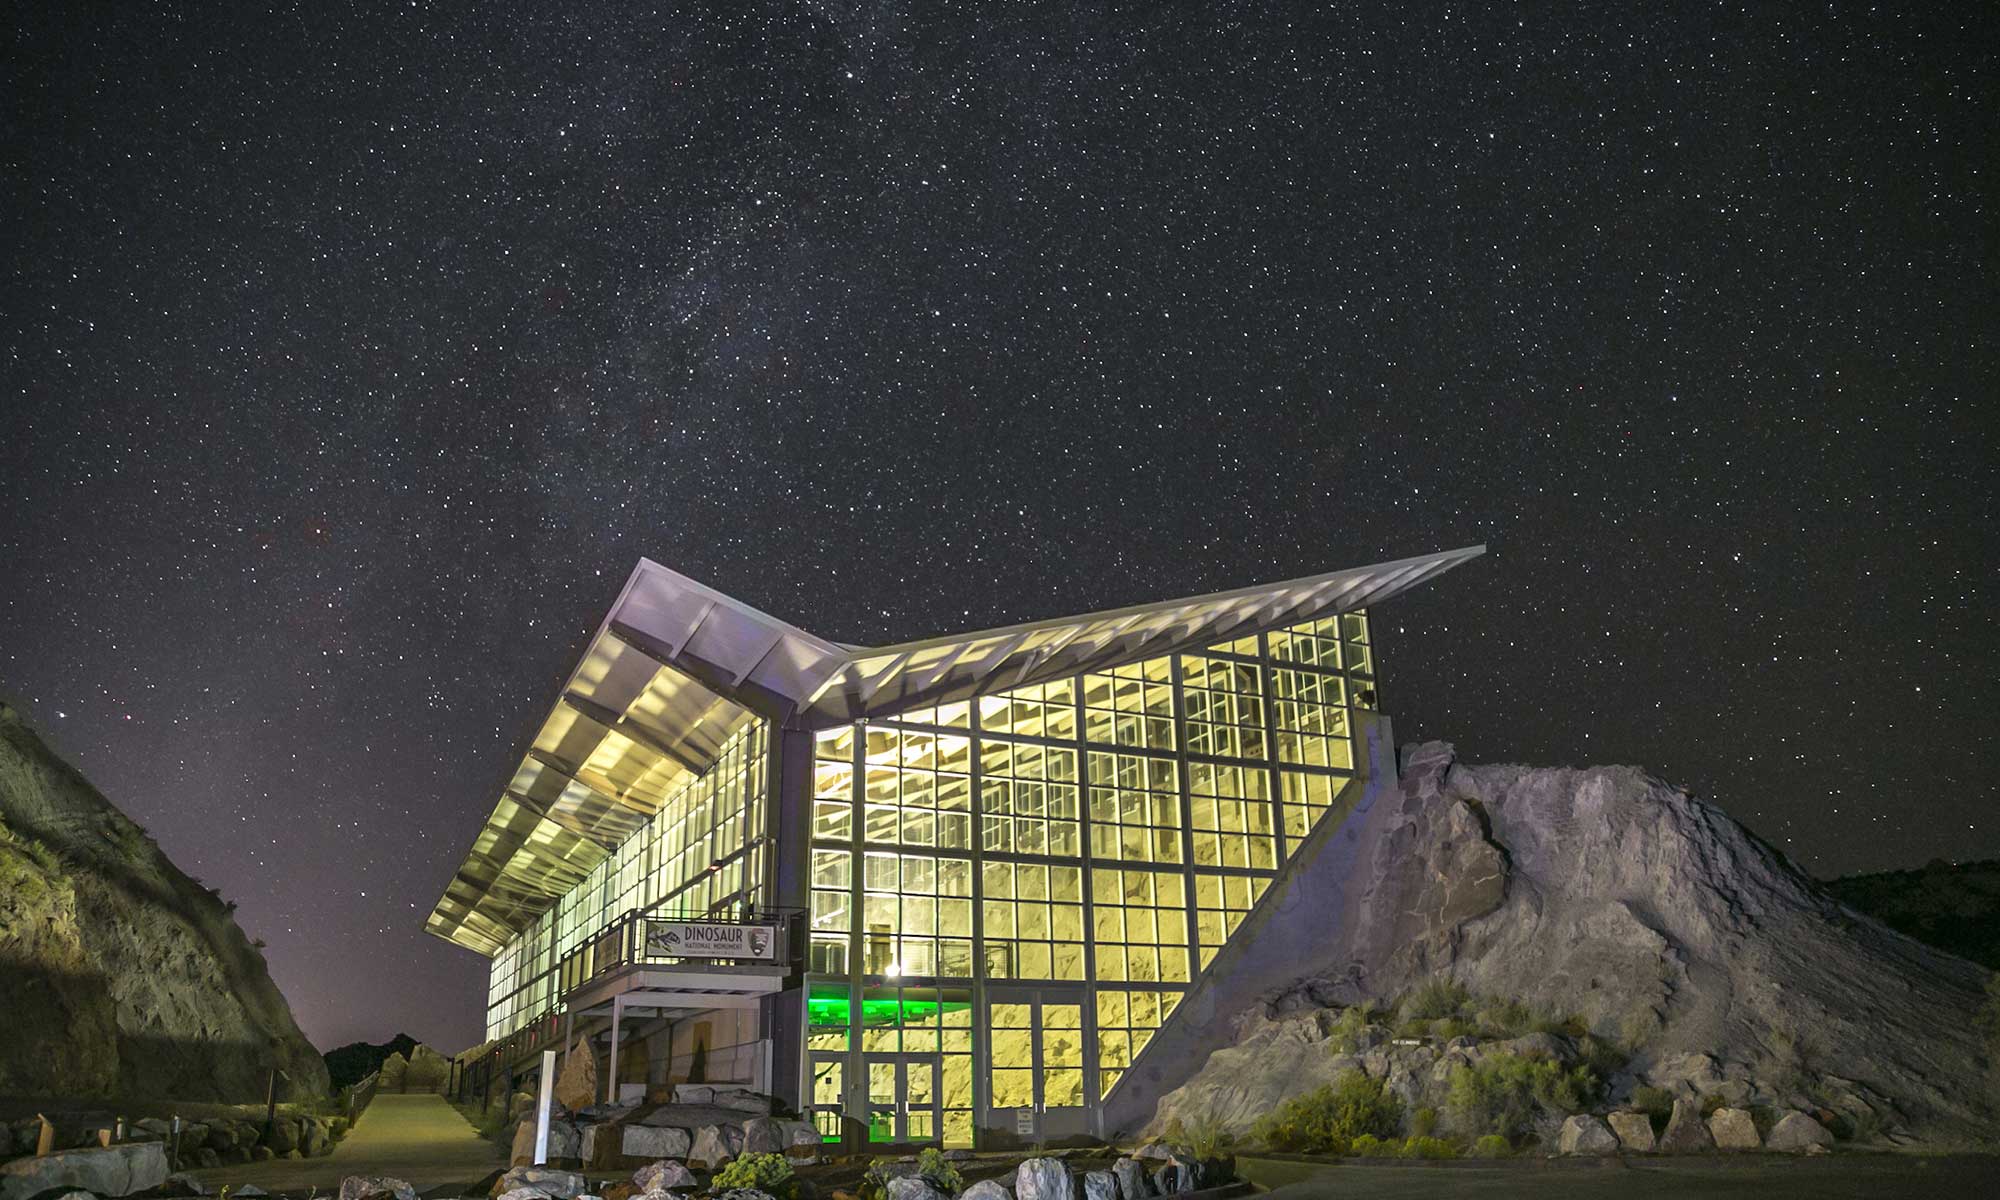 Stars fill the sky above the Quarry Exhibit Hall in Dinosaur National Monument | NPS Photo by Jacob Holgerson